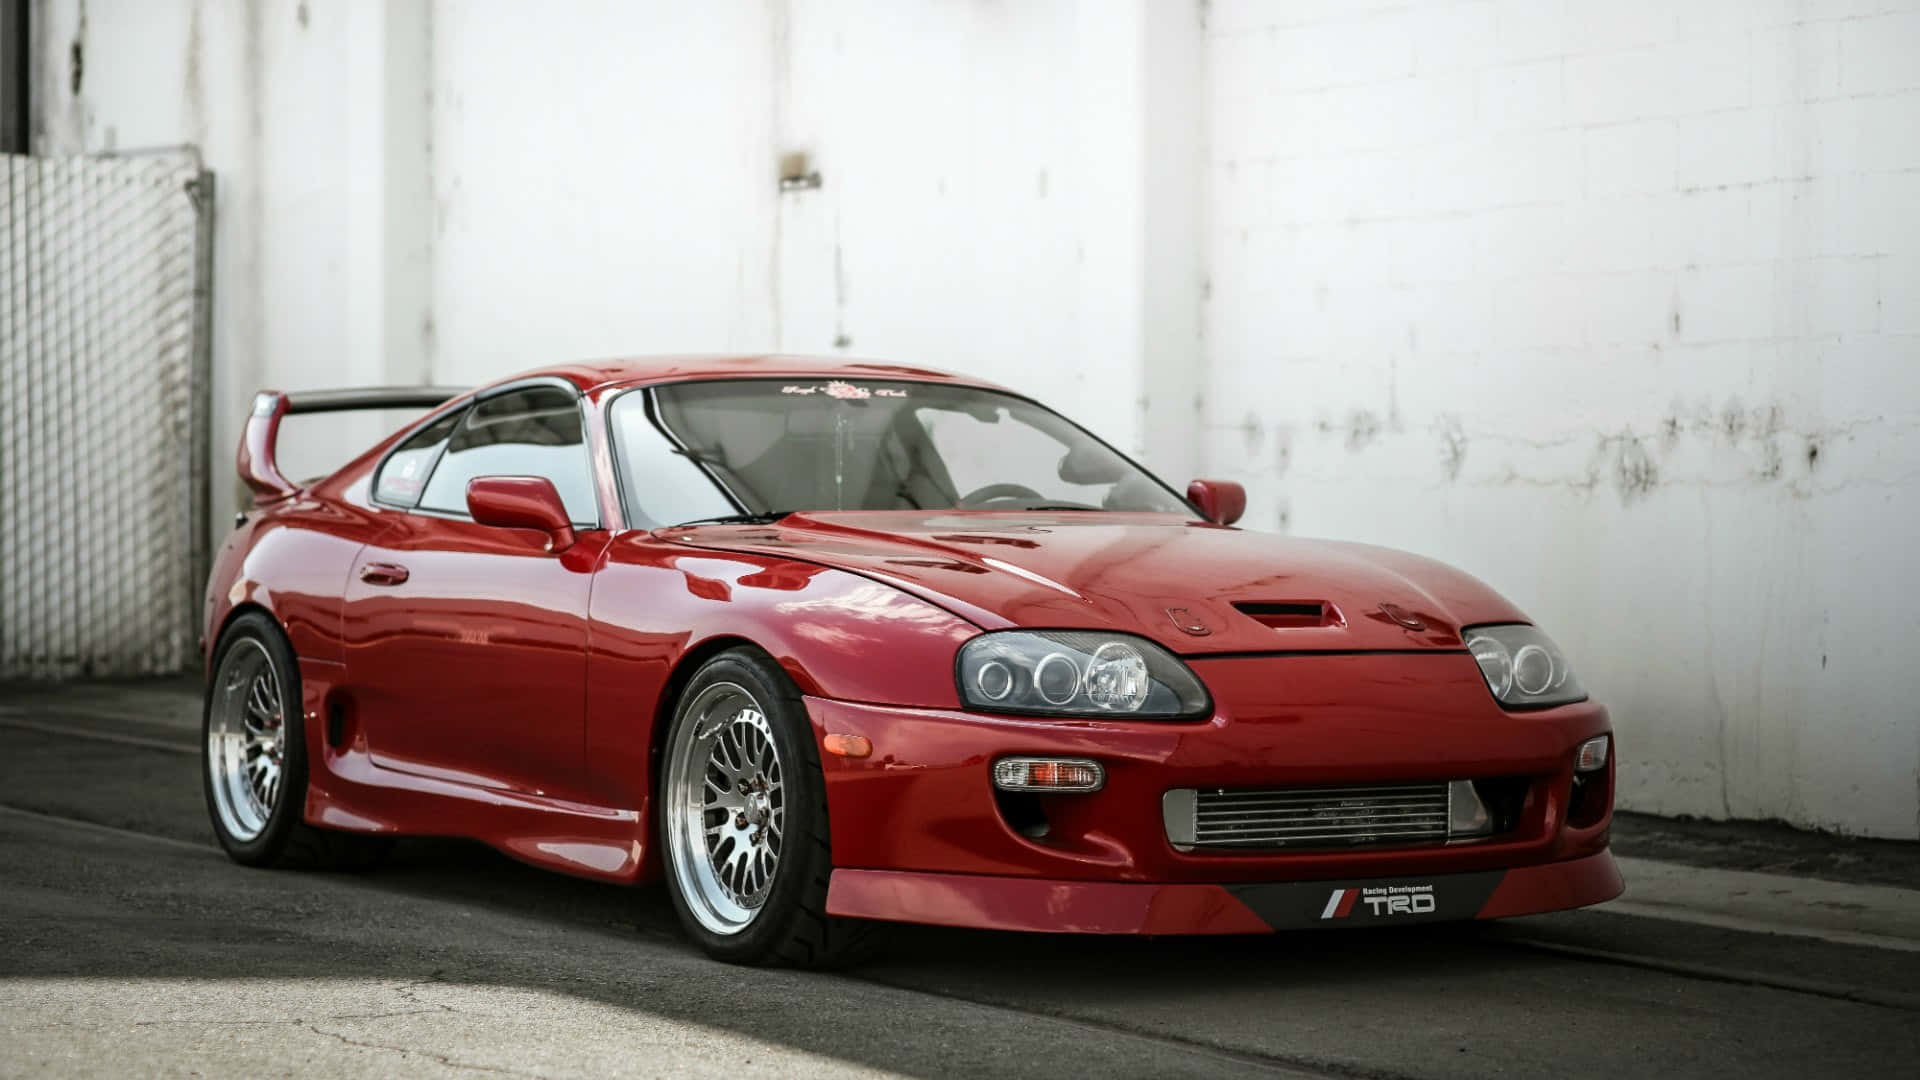 Stunning Supra in Action